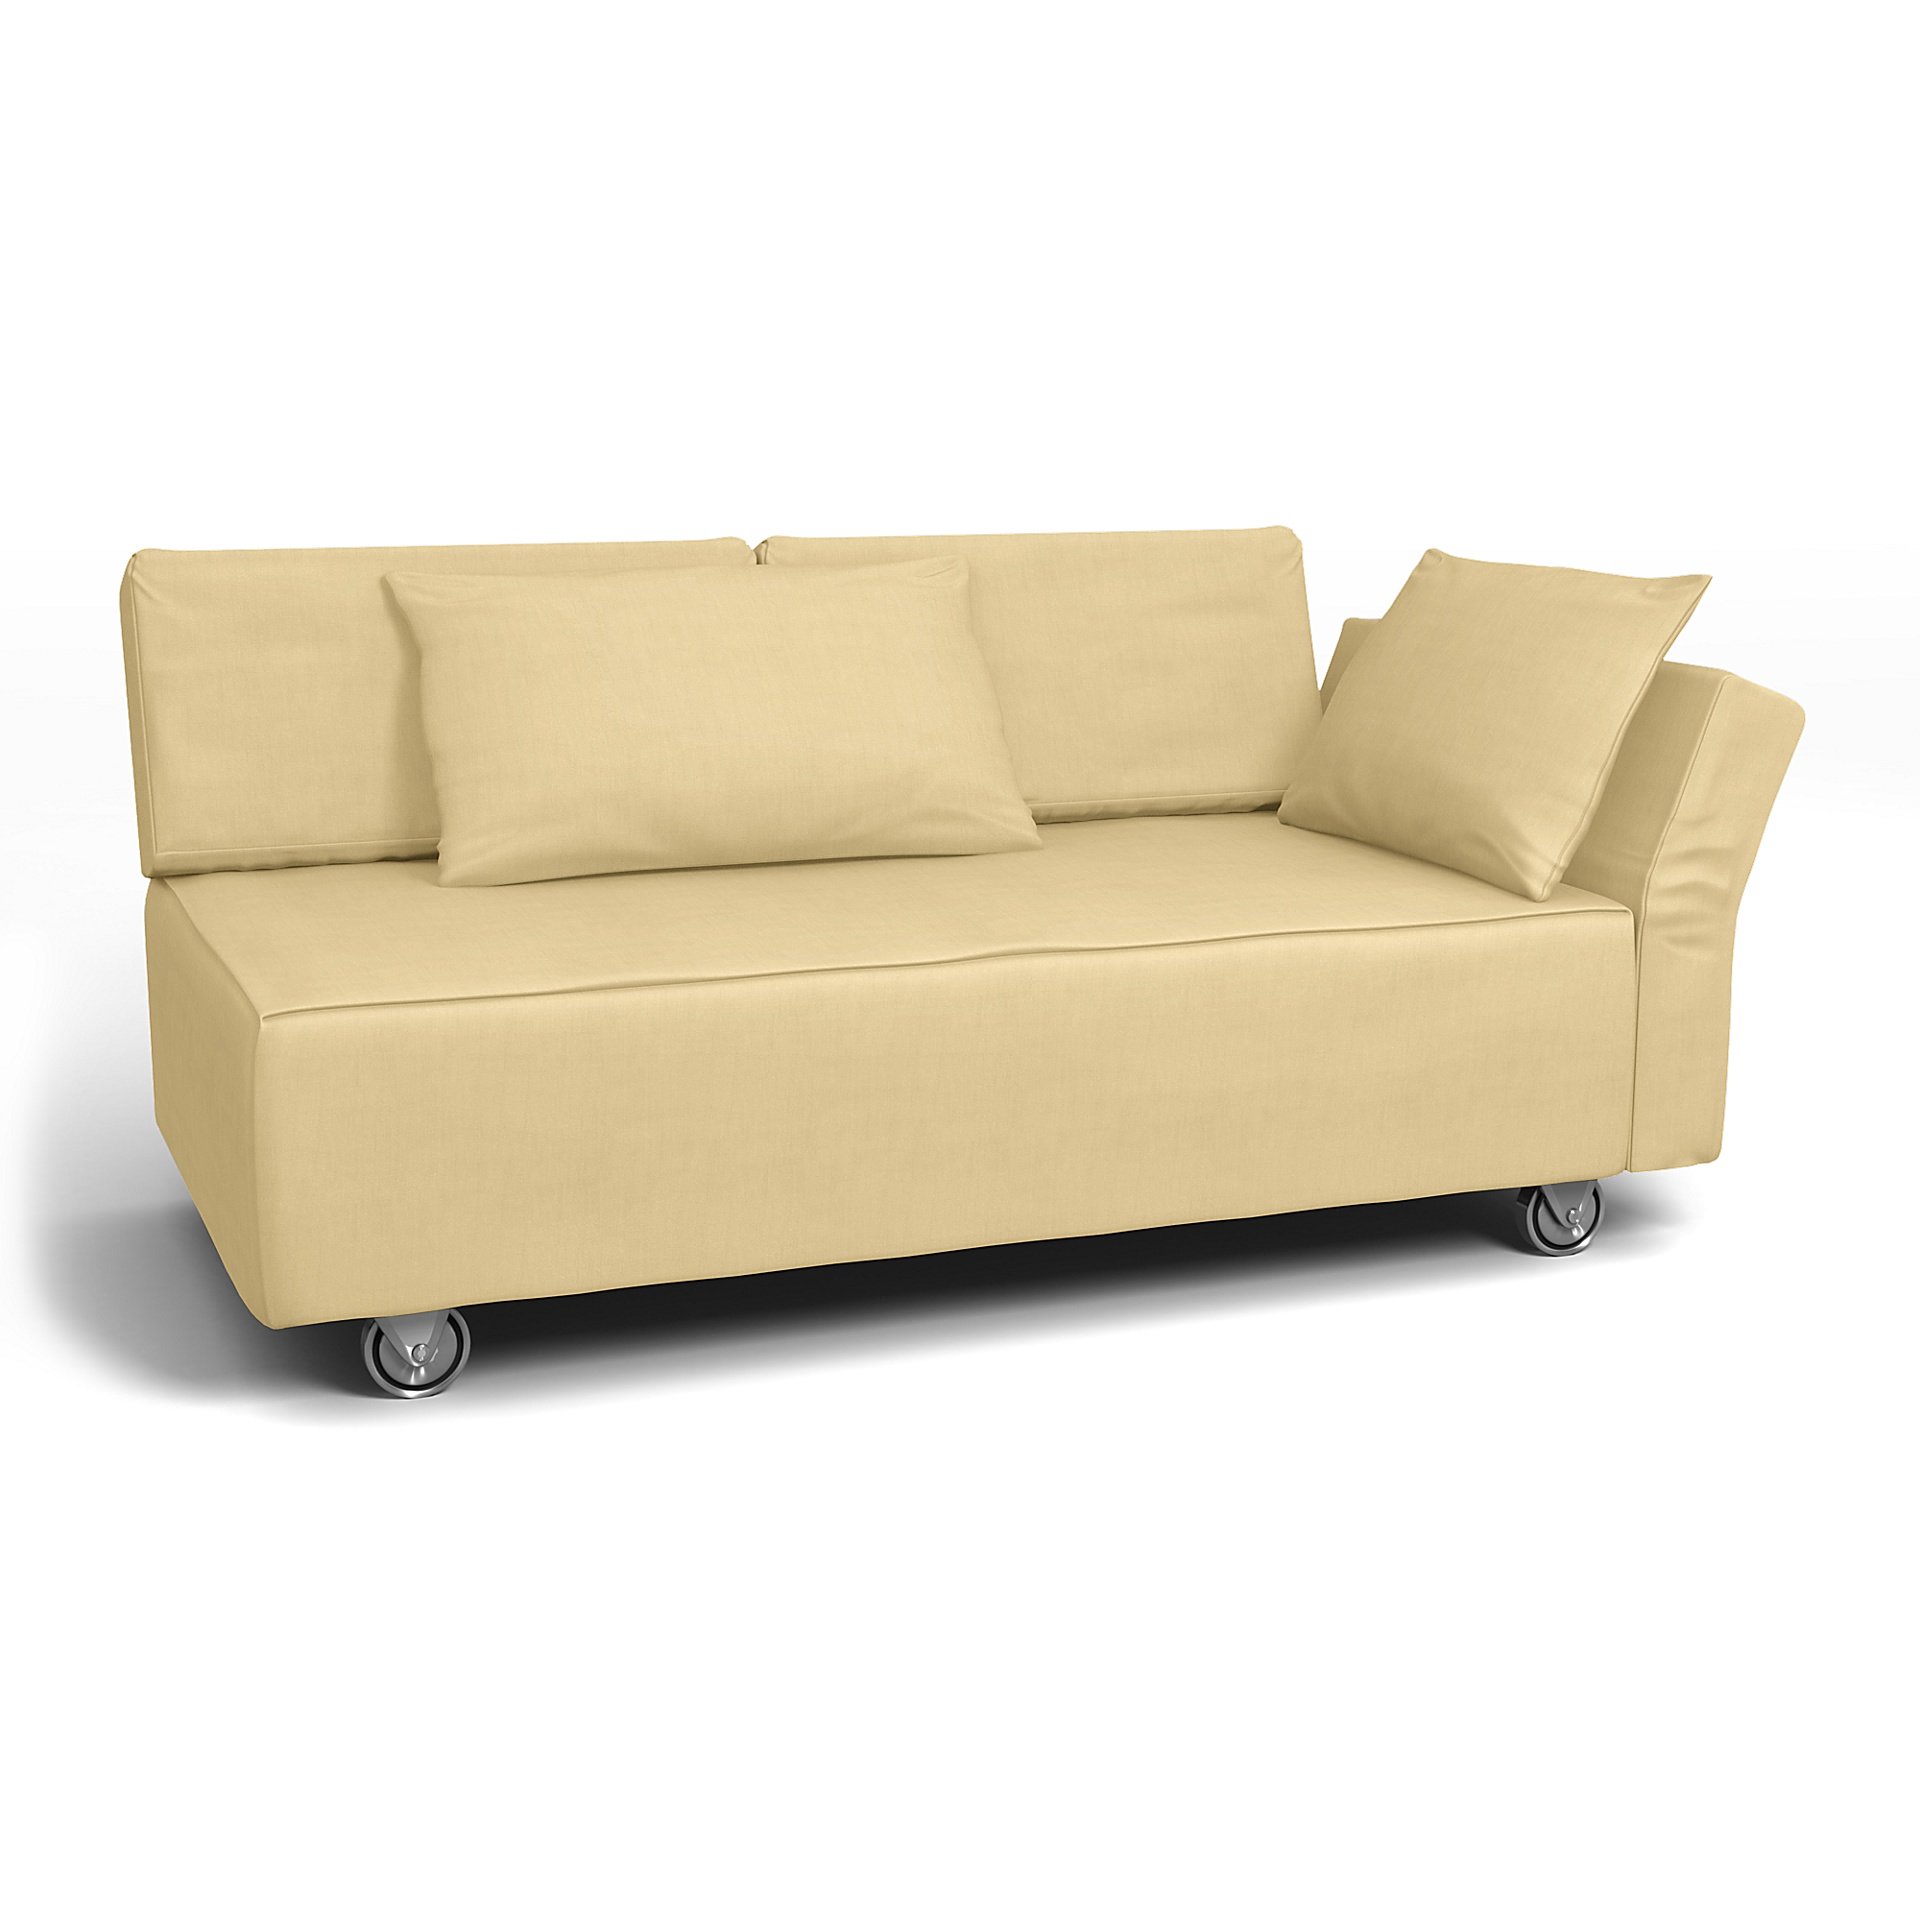 IKEA - Falsterbo 2 Seat Sofa with Right Arm Cover, Straw Yellow, Linen - Bemz